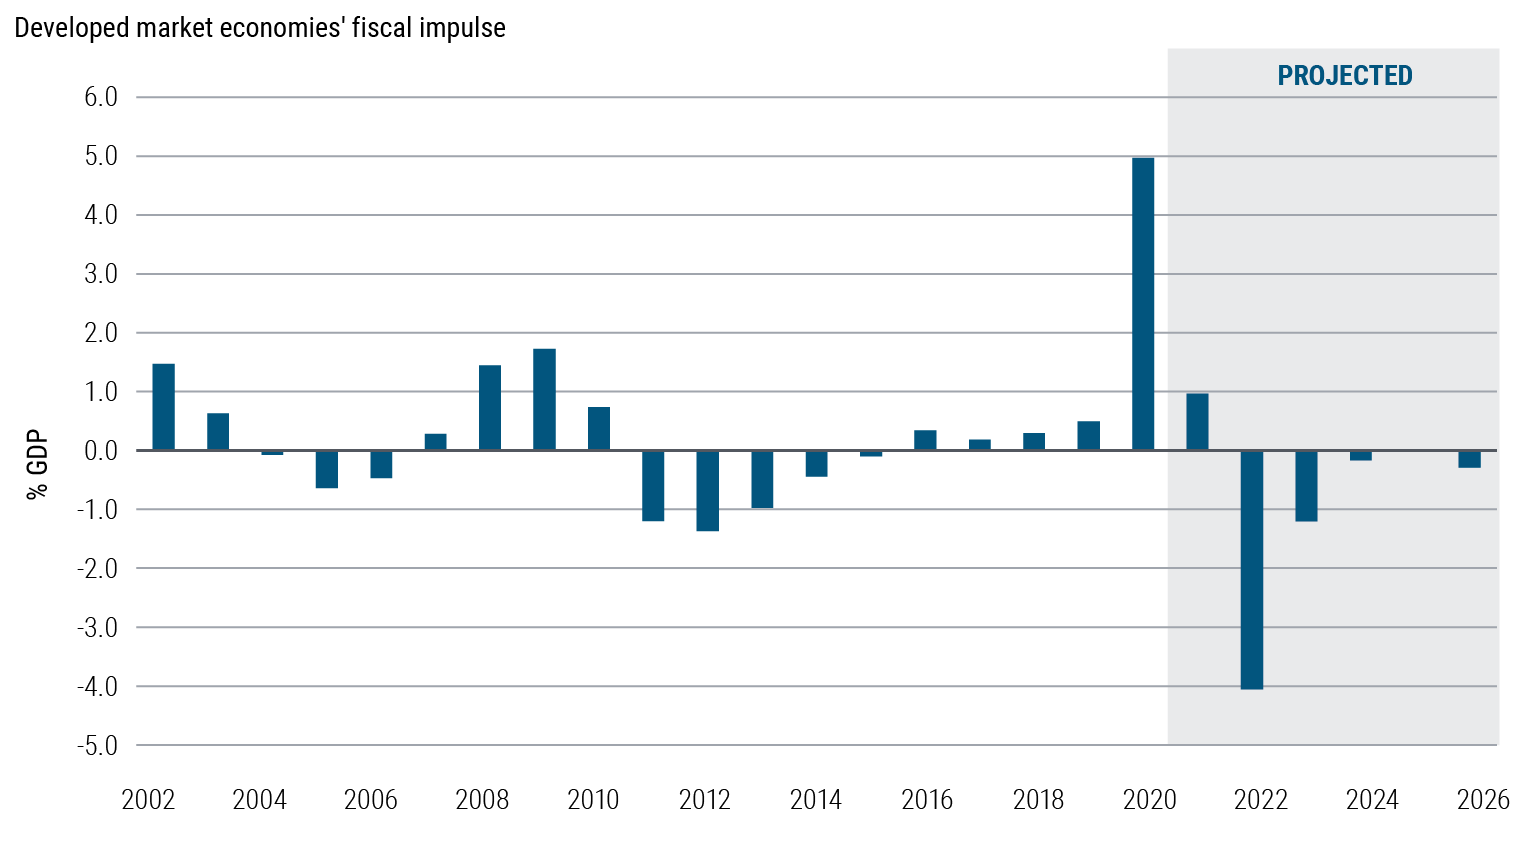 Figure 1 is a bar chart showing the annual fiscal impulse across the U.S., U.K., EU, Canada, and Japan, as measured by the GDP-weighted change in the structural primary balance. From 2002 to 2019, the figure ranges between −1.5% and 1.5%, but in 2020, it surged to 4.9%. PIMCO’s projections are for the fiscal impulse to fall to 0.9% in 2021, and then to −4.1% in 2022, exerting a fiscal drag before moderating in the years that follow.